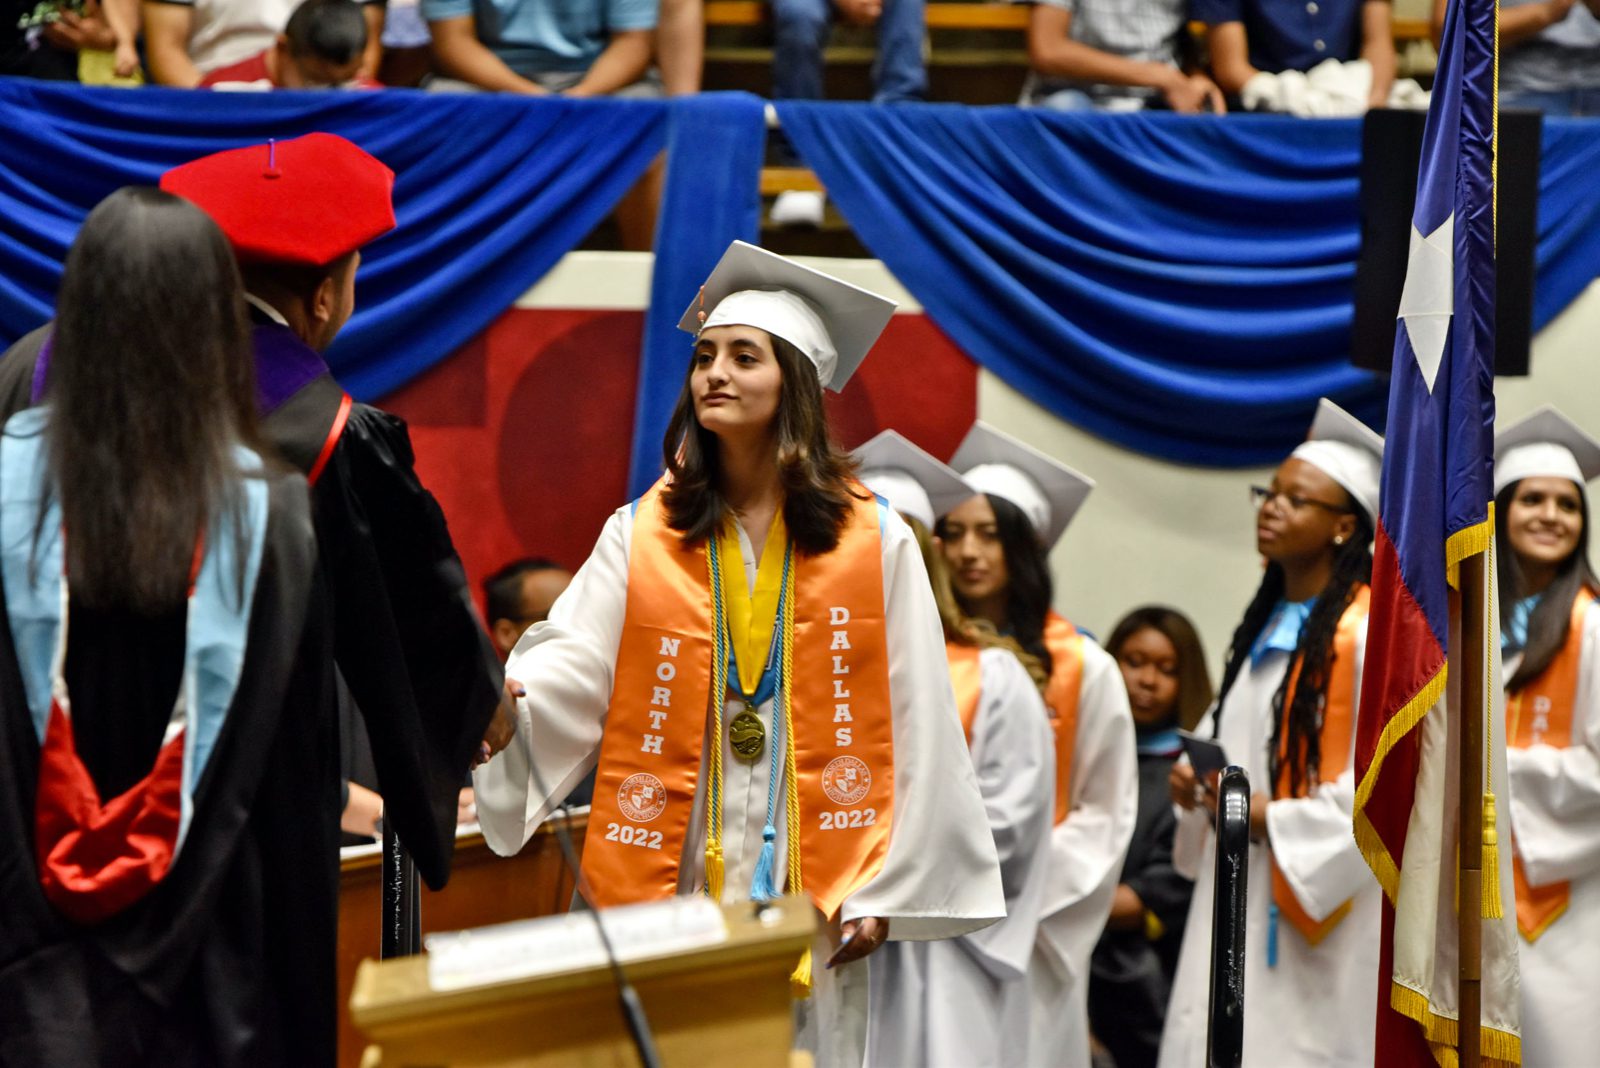 Cindy Gomez leads the procession on stage to receive her diploma.